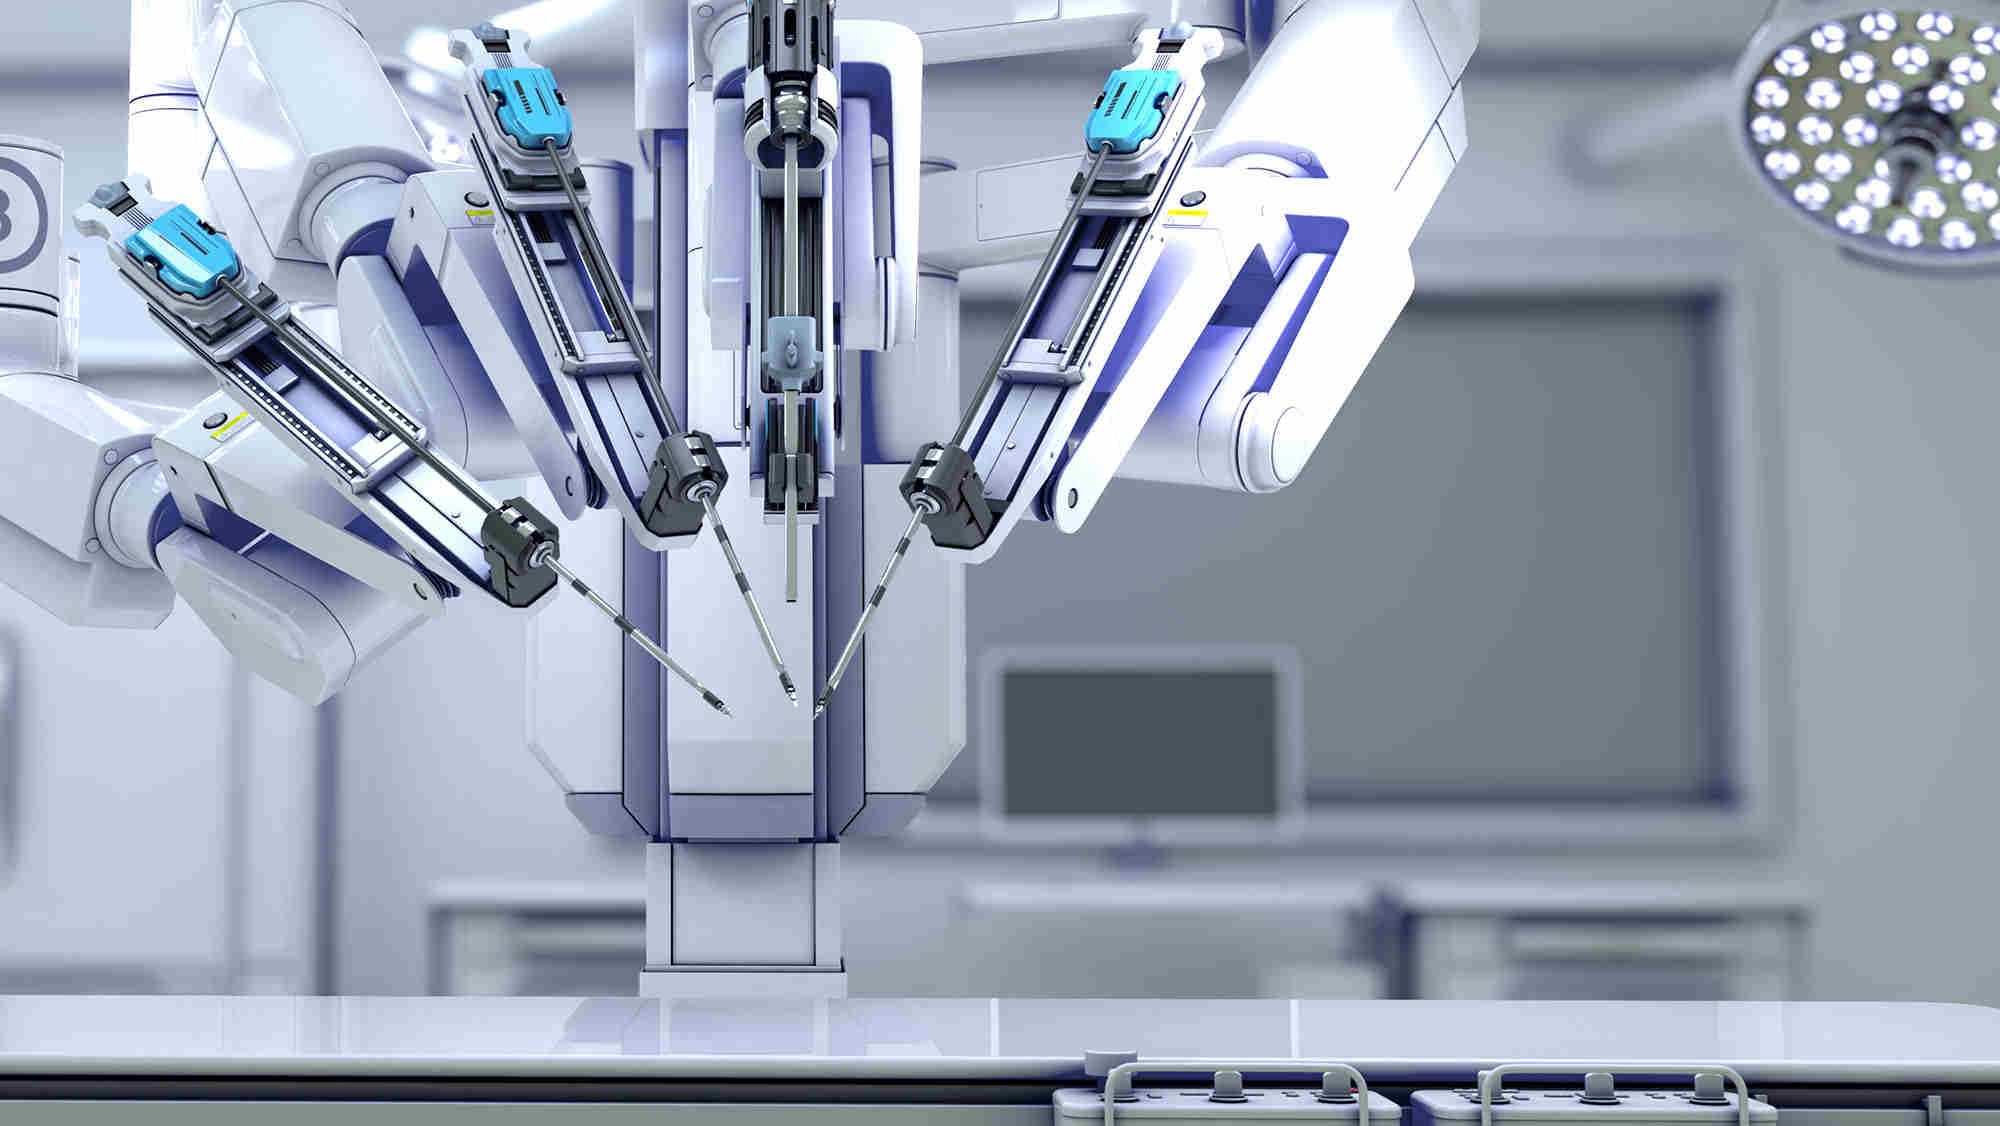 Four armed robot used for surgery